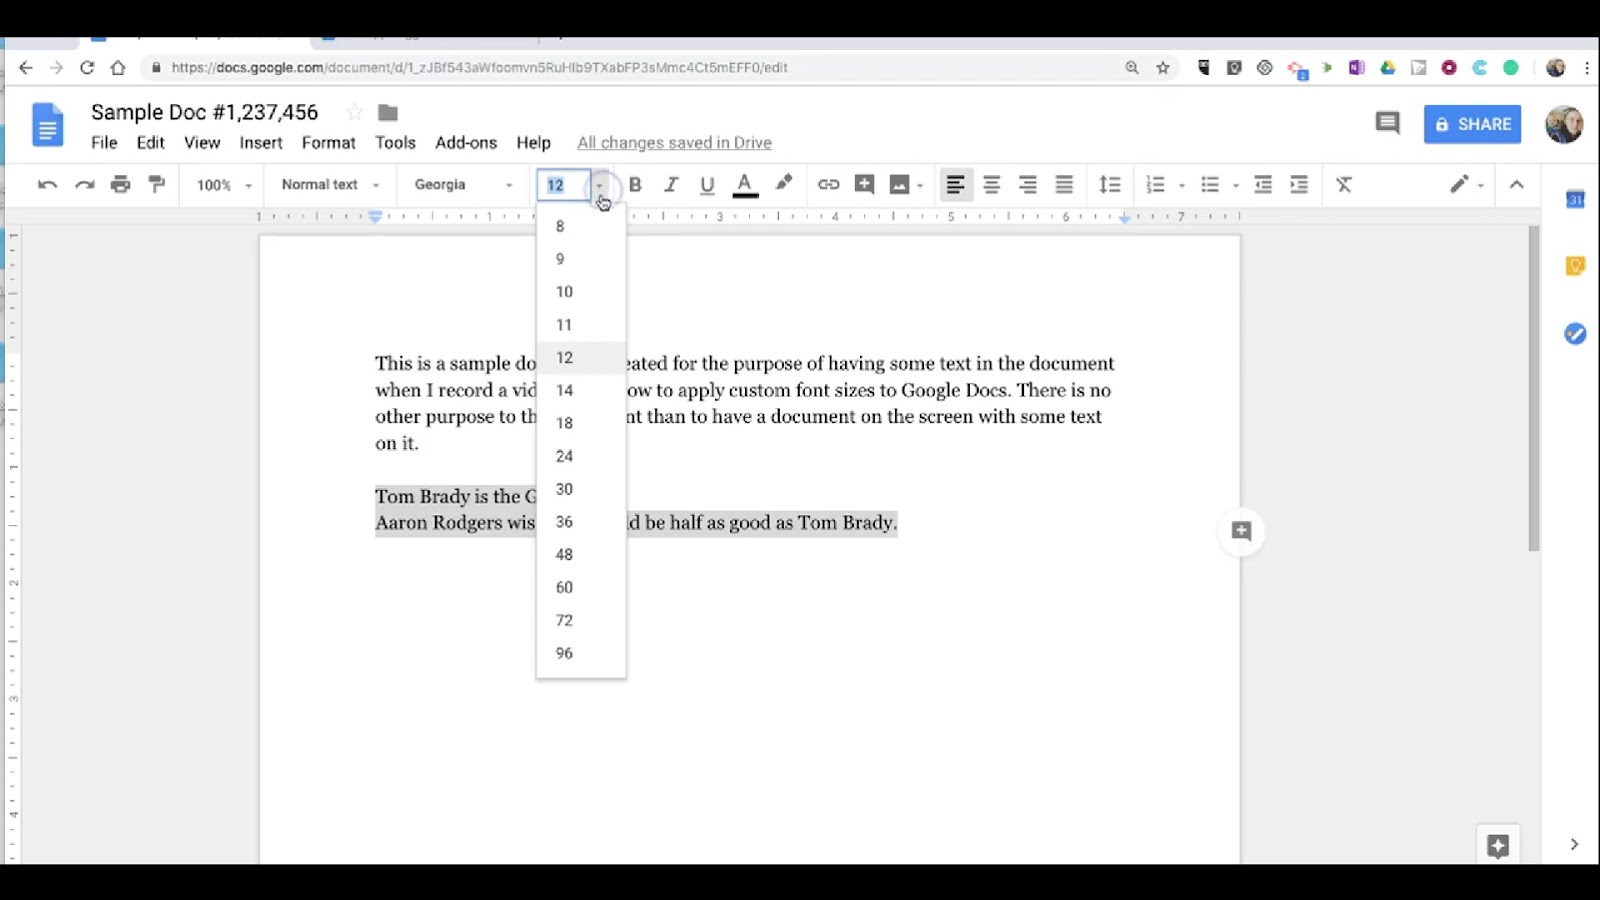 Unveiling the Largest Typeface in Google Docs